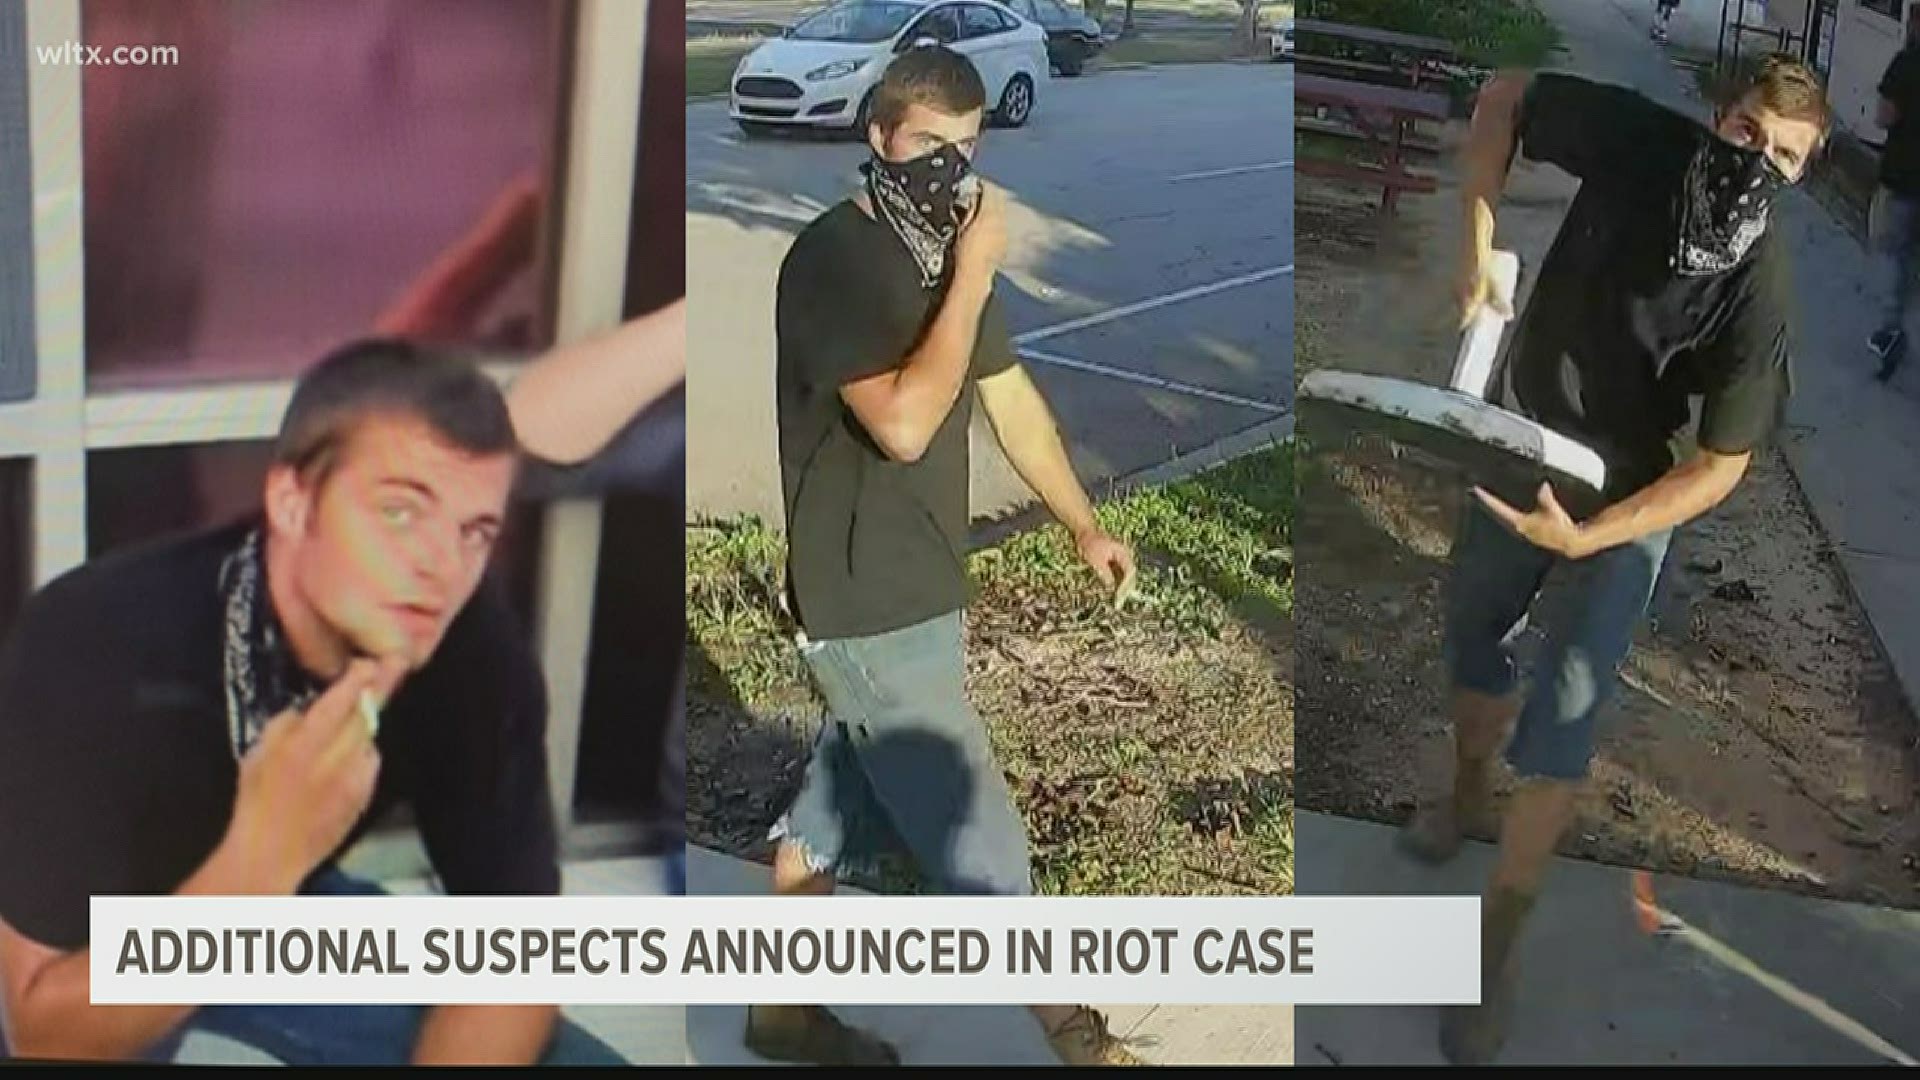 Sheriff Leon Lott and Columbia Police Chief Skip Holbrook have announced additional suspects in their riot investigation.